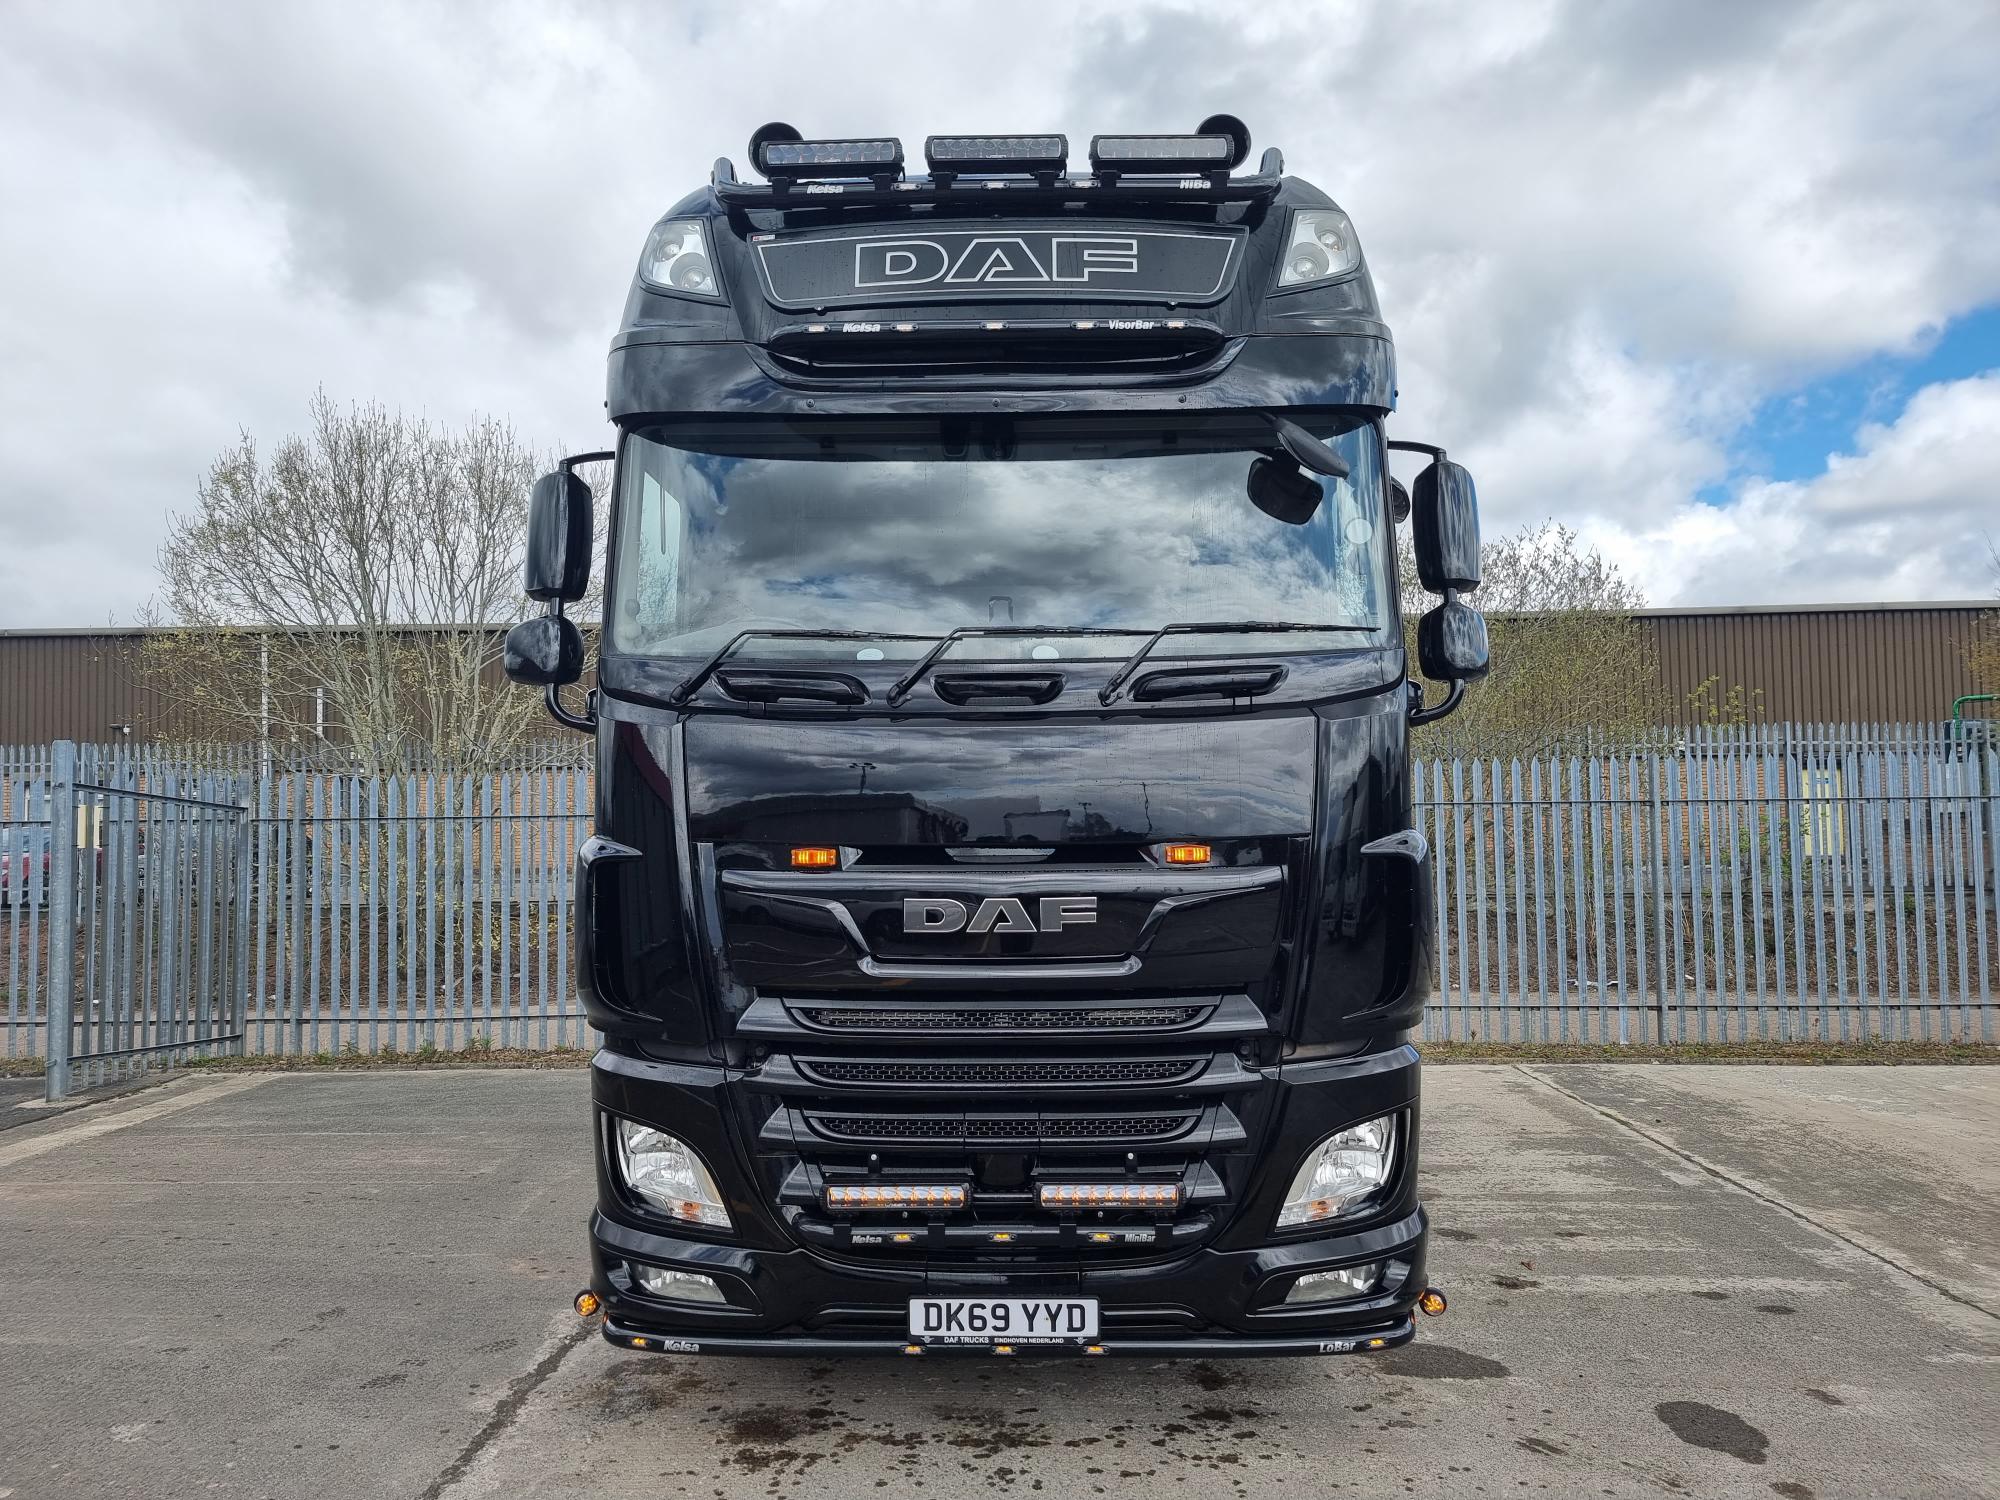 2019 (69) DAF XF, Euro 6, 530bhp, Superspace Twin Sleeper Cab, Steering Wheel Controls, Truck has been fully customised, Automatic Gearbox, Mid-Lift Axle, Fridge, Air Con, Electric Mirrors/Windows, Sat-Nav, Aluminium Catwalk Infill Panels, Air Horns, Light Bars, Finance & Warranty Options Available.